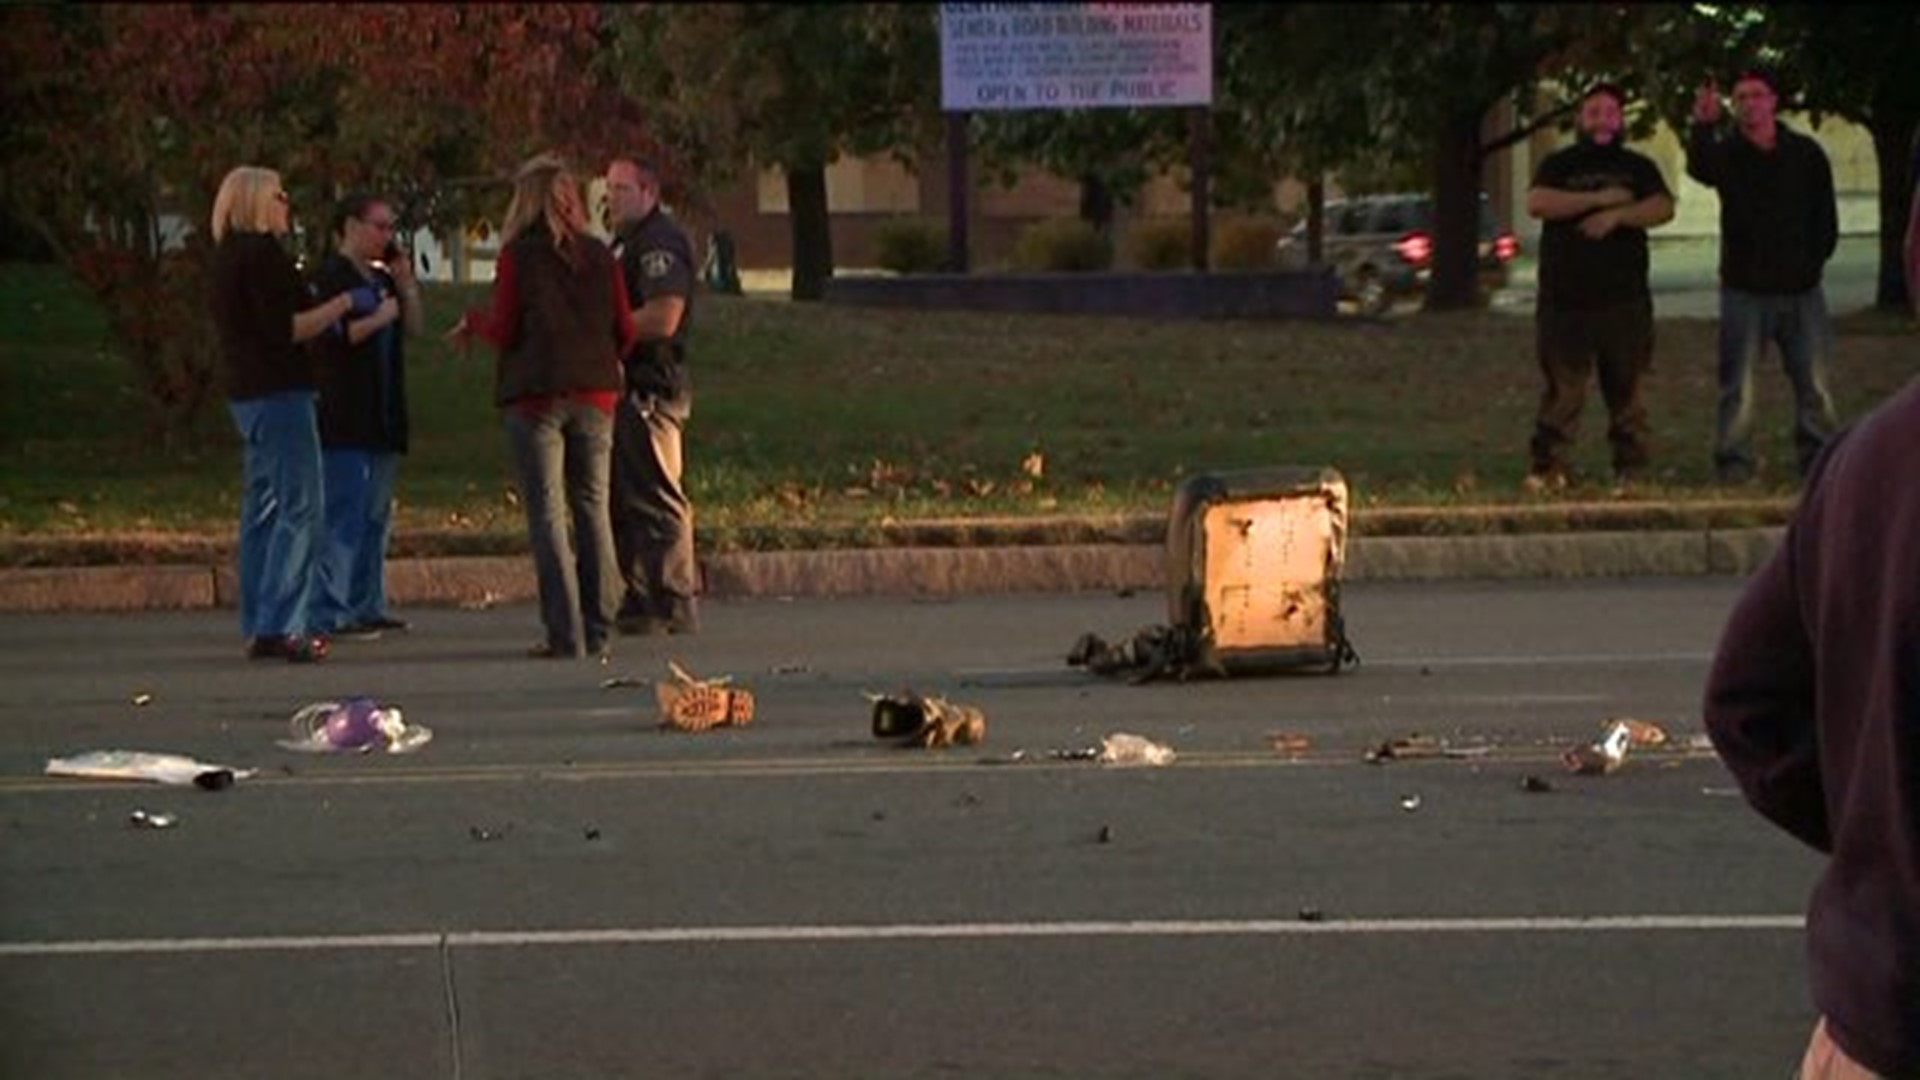 Update: Man on Motorized Wheelchair Hit by Vehicle Has Died